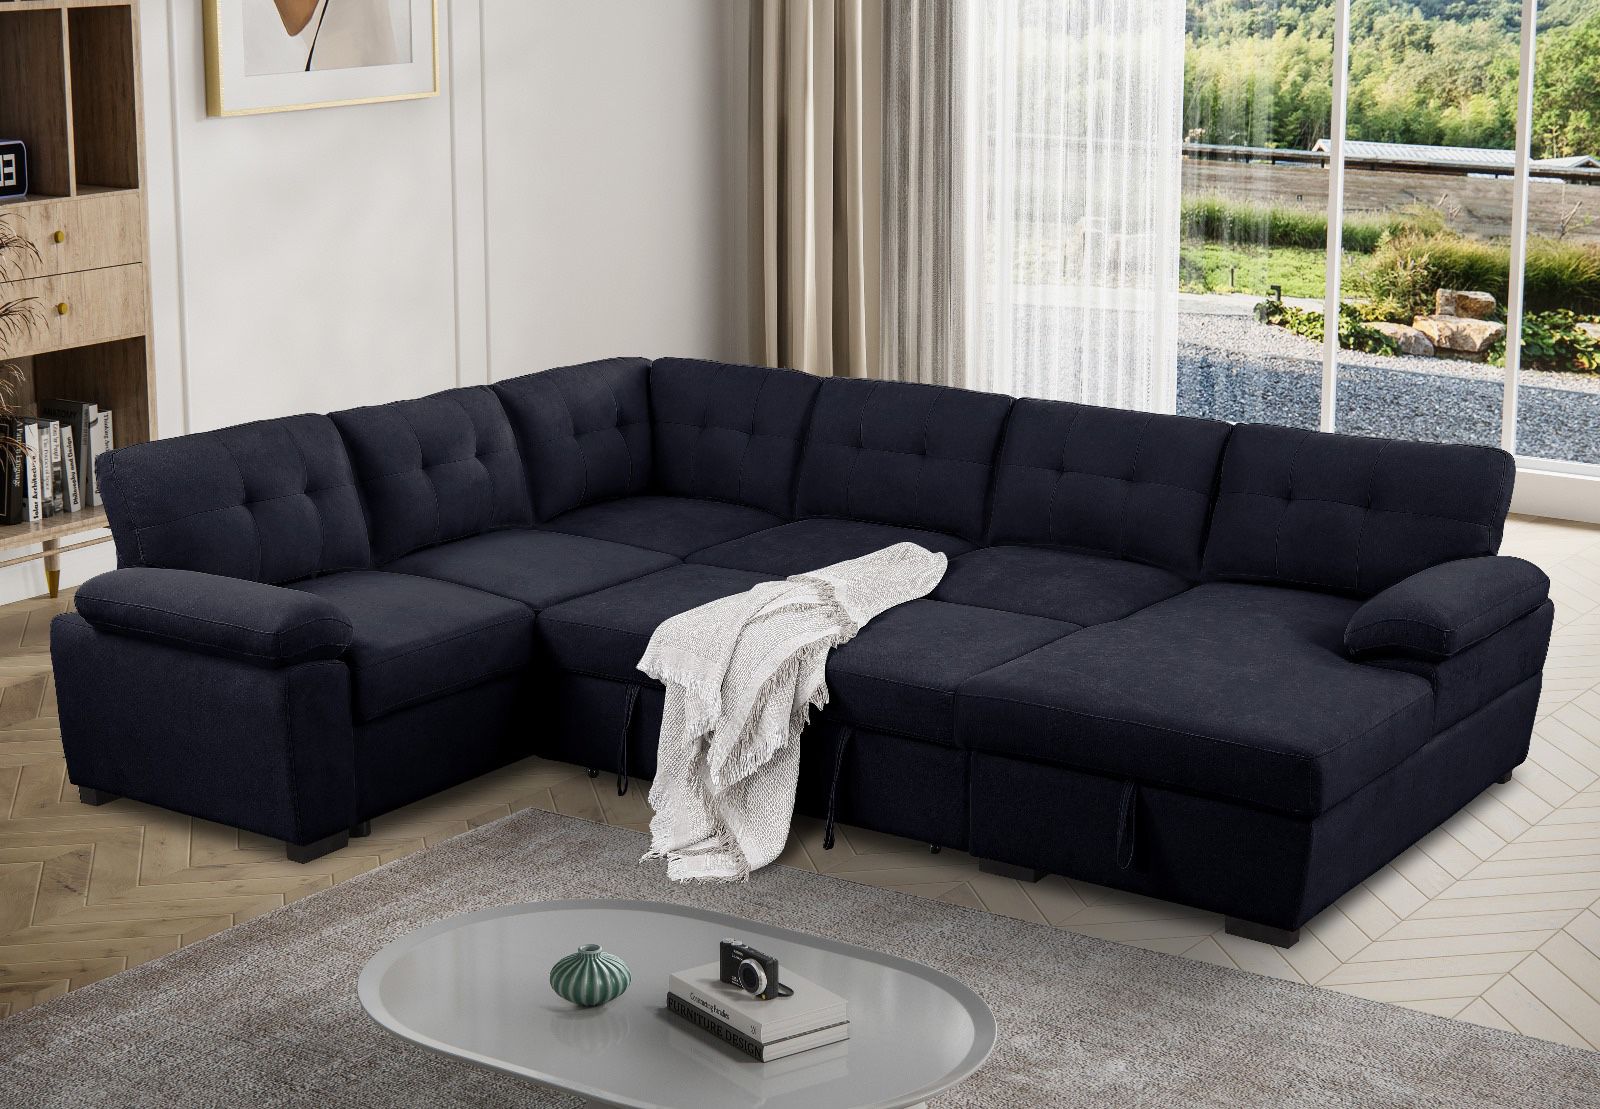 New! Premium Sectional Sofa Bed, Sofa Bed, Sectional, Sectionals, Sectional Sofa, Sectional Couch, Sleeper Sofa, Sectional Sofa With Pull Out Bed